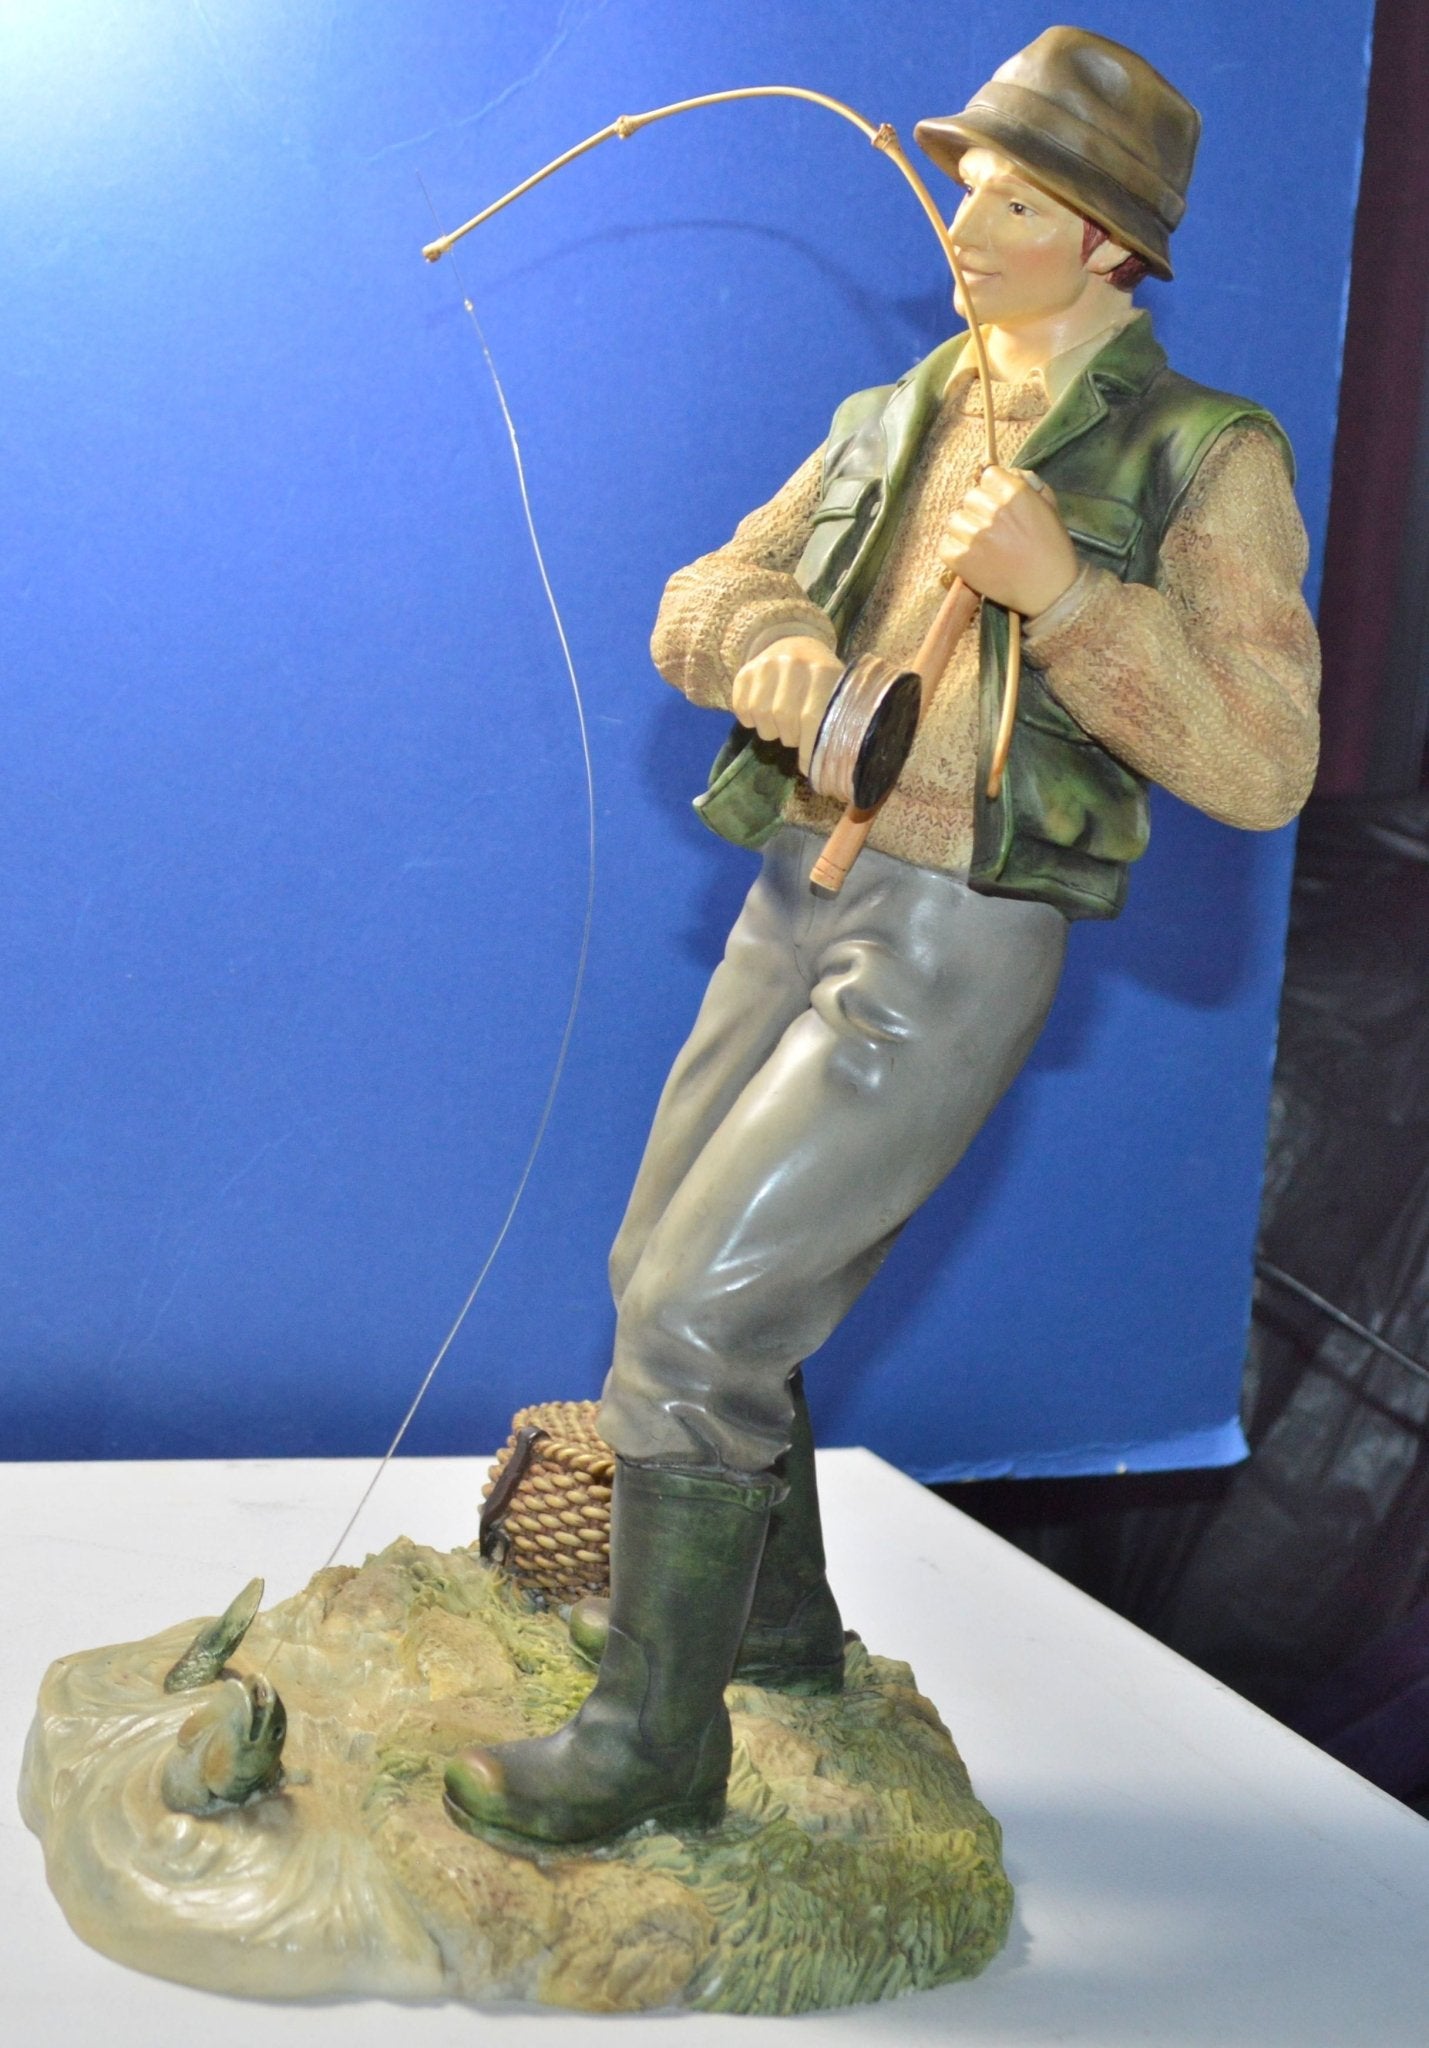 LEONARDO COLLECTION FIGURINE THE CATCH(PREVIOUSLY OWNED) GOOD CONDITION - TMD167207